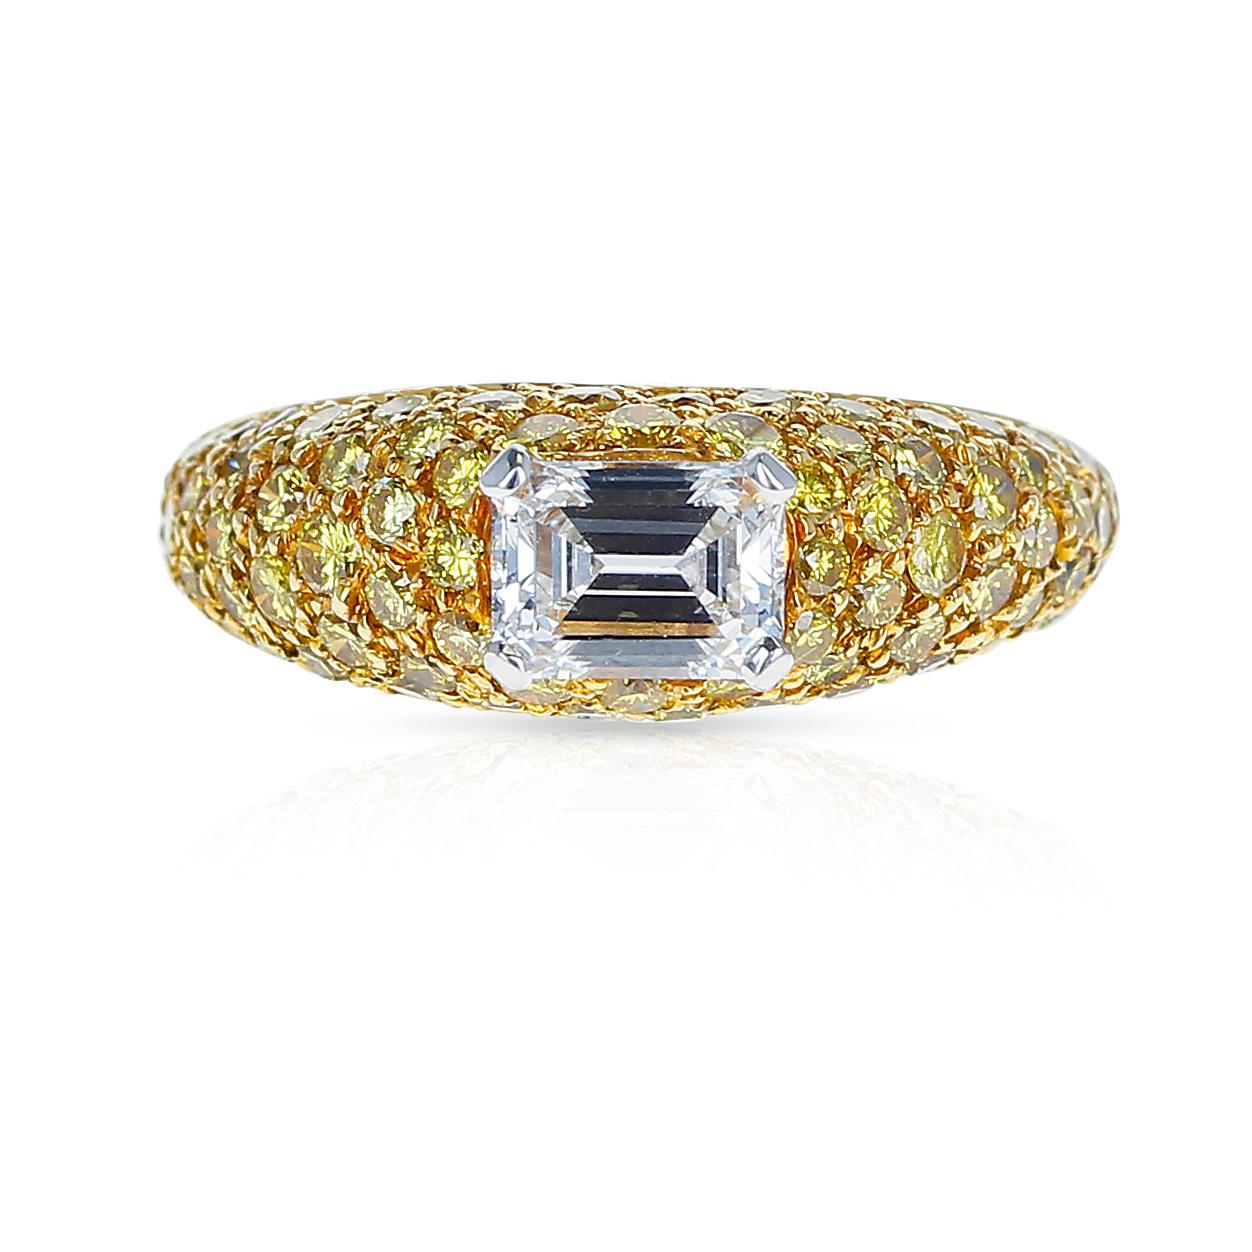 A chic emerald-cut white diamond and yellow diamond bombe ring, by Graff. This ring can be worn in both casual and formal environments. It is set with one E-Color, VVS1-Clarity, Emerald-Cut Diamond, weighing 0.80 carats, accented with 76 round